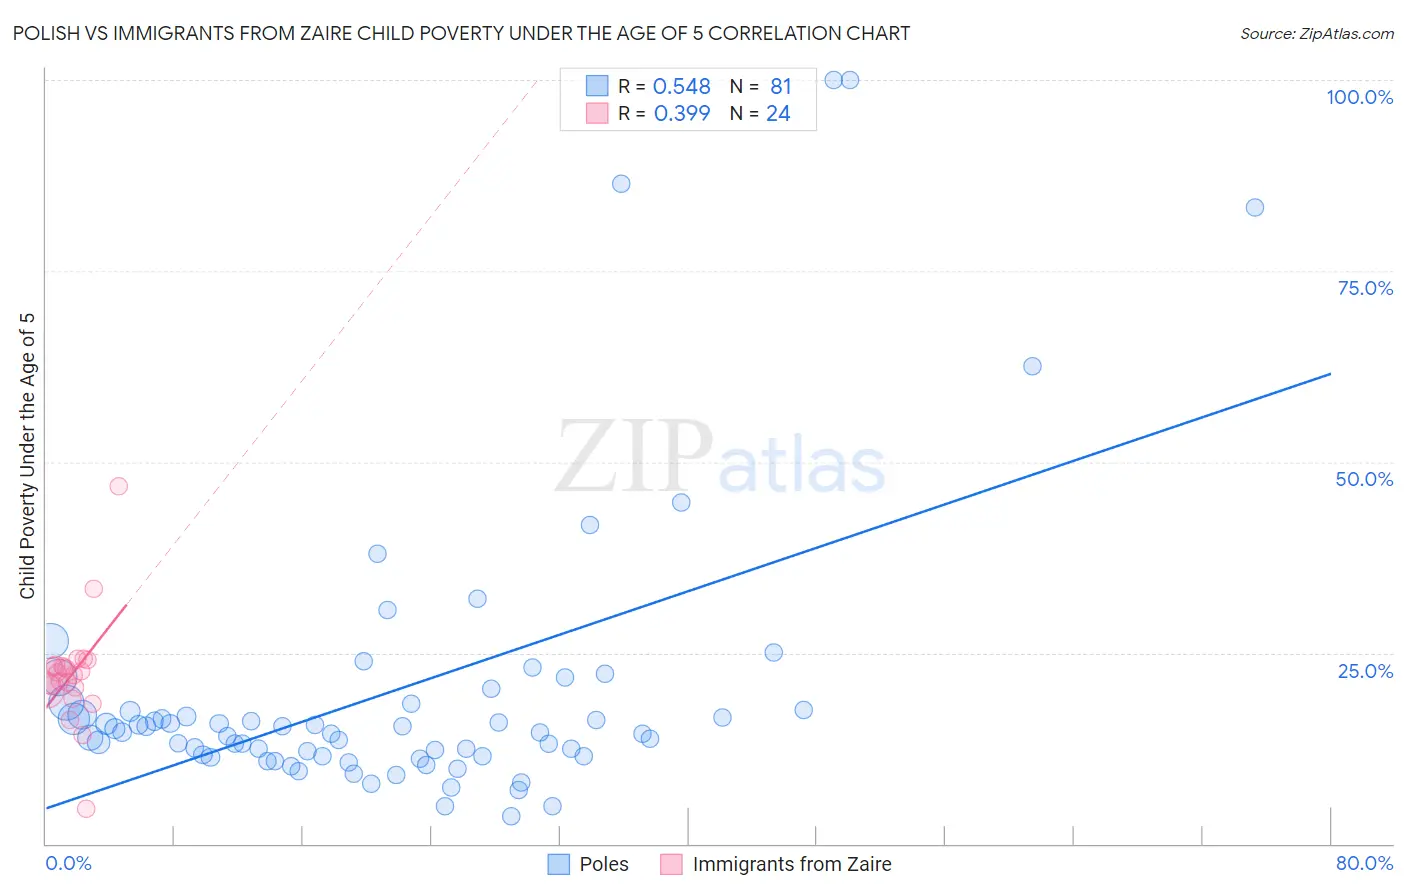 Polish vs Immigrants from Zaire Child Poverty Under the Age of 5